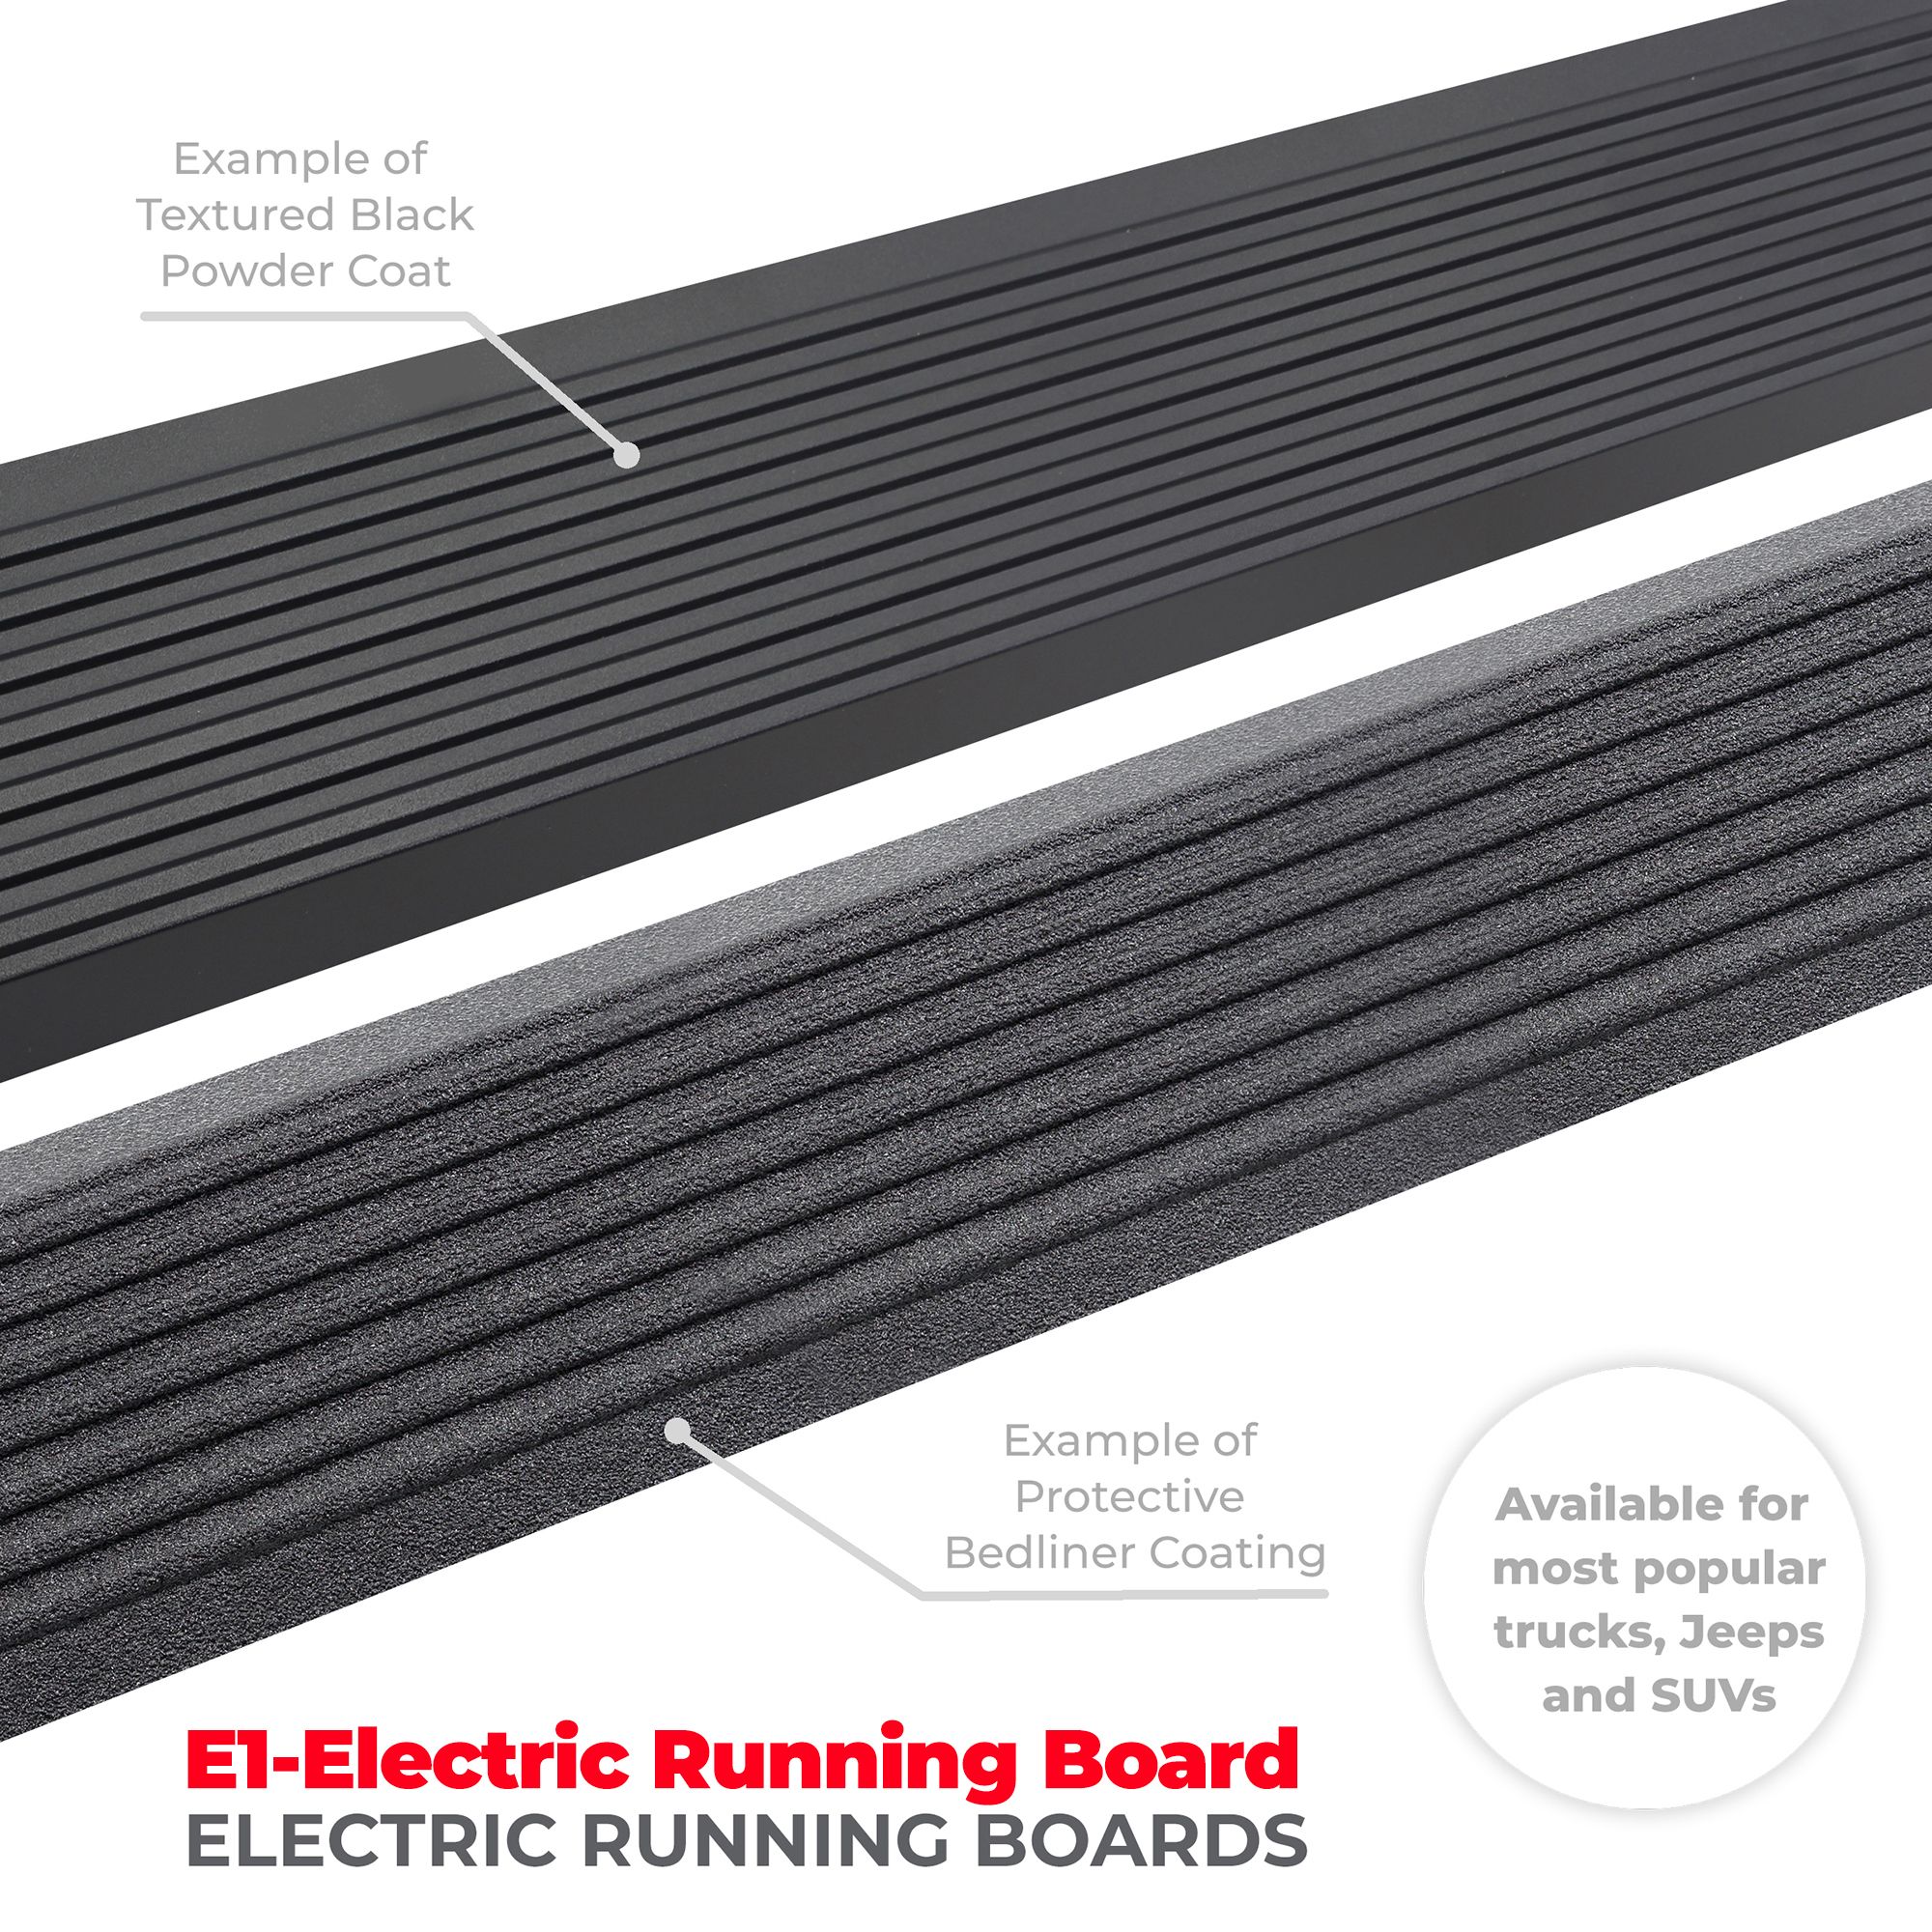 Go Rhino 20410125T - E1 Electric Running Boards With Mounting Brackets - Protective Bedliner Coating